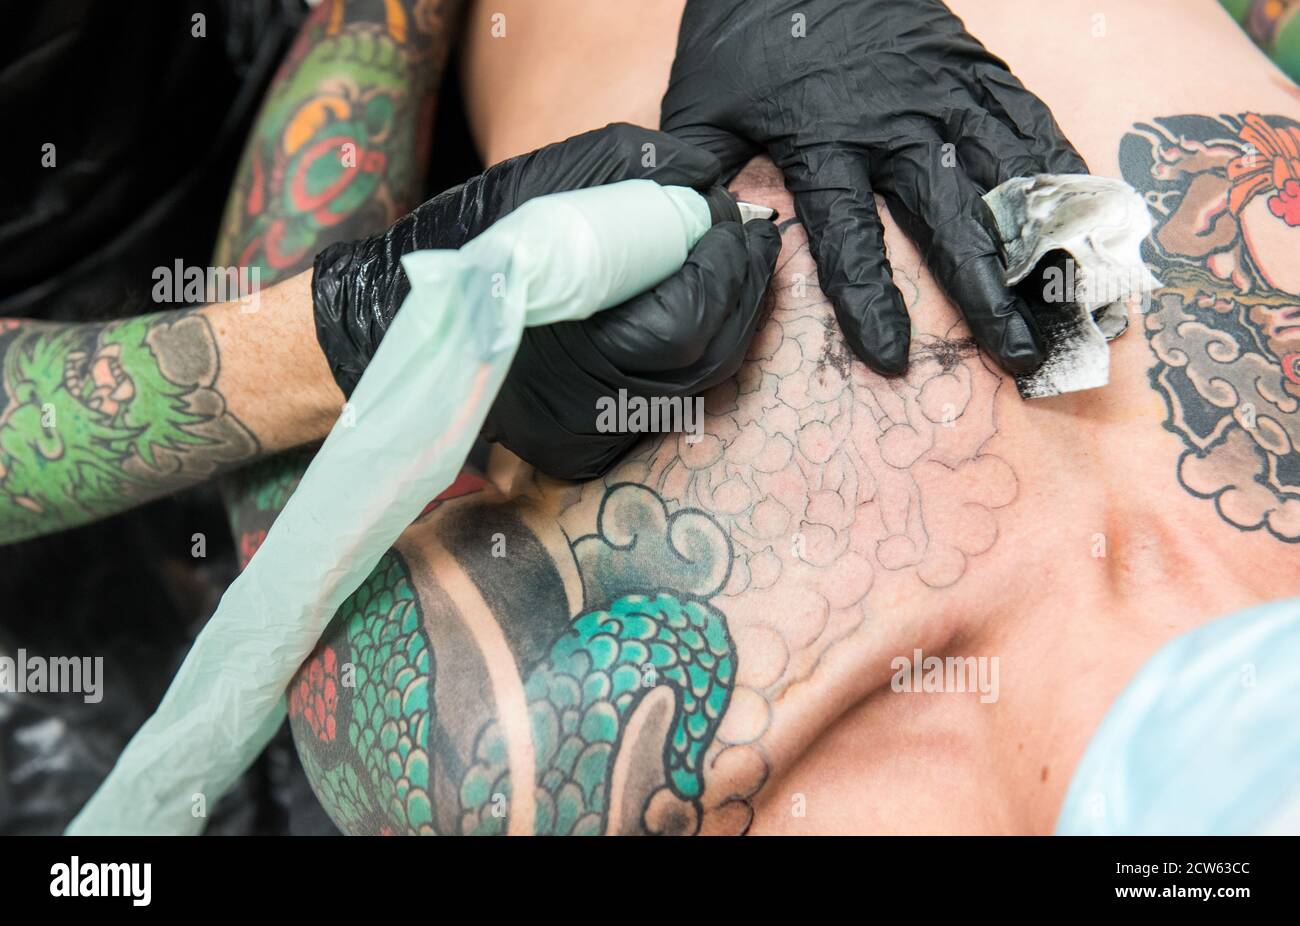 Hamburg, Germany. 16th Sep, 2020. A man is tattooed in the tattoo studio of the Edding company. The pigments "Blue 15" and "Green 7" are threatened with a Europe-wide ban in tattoo